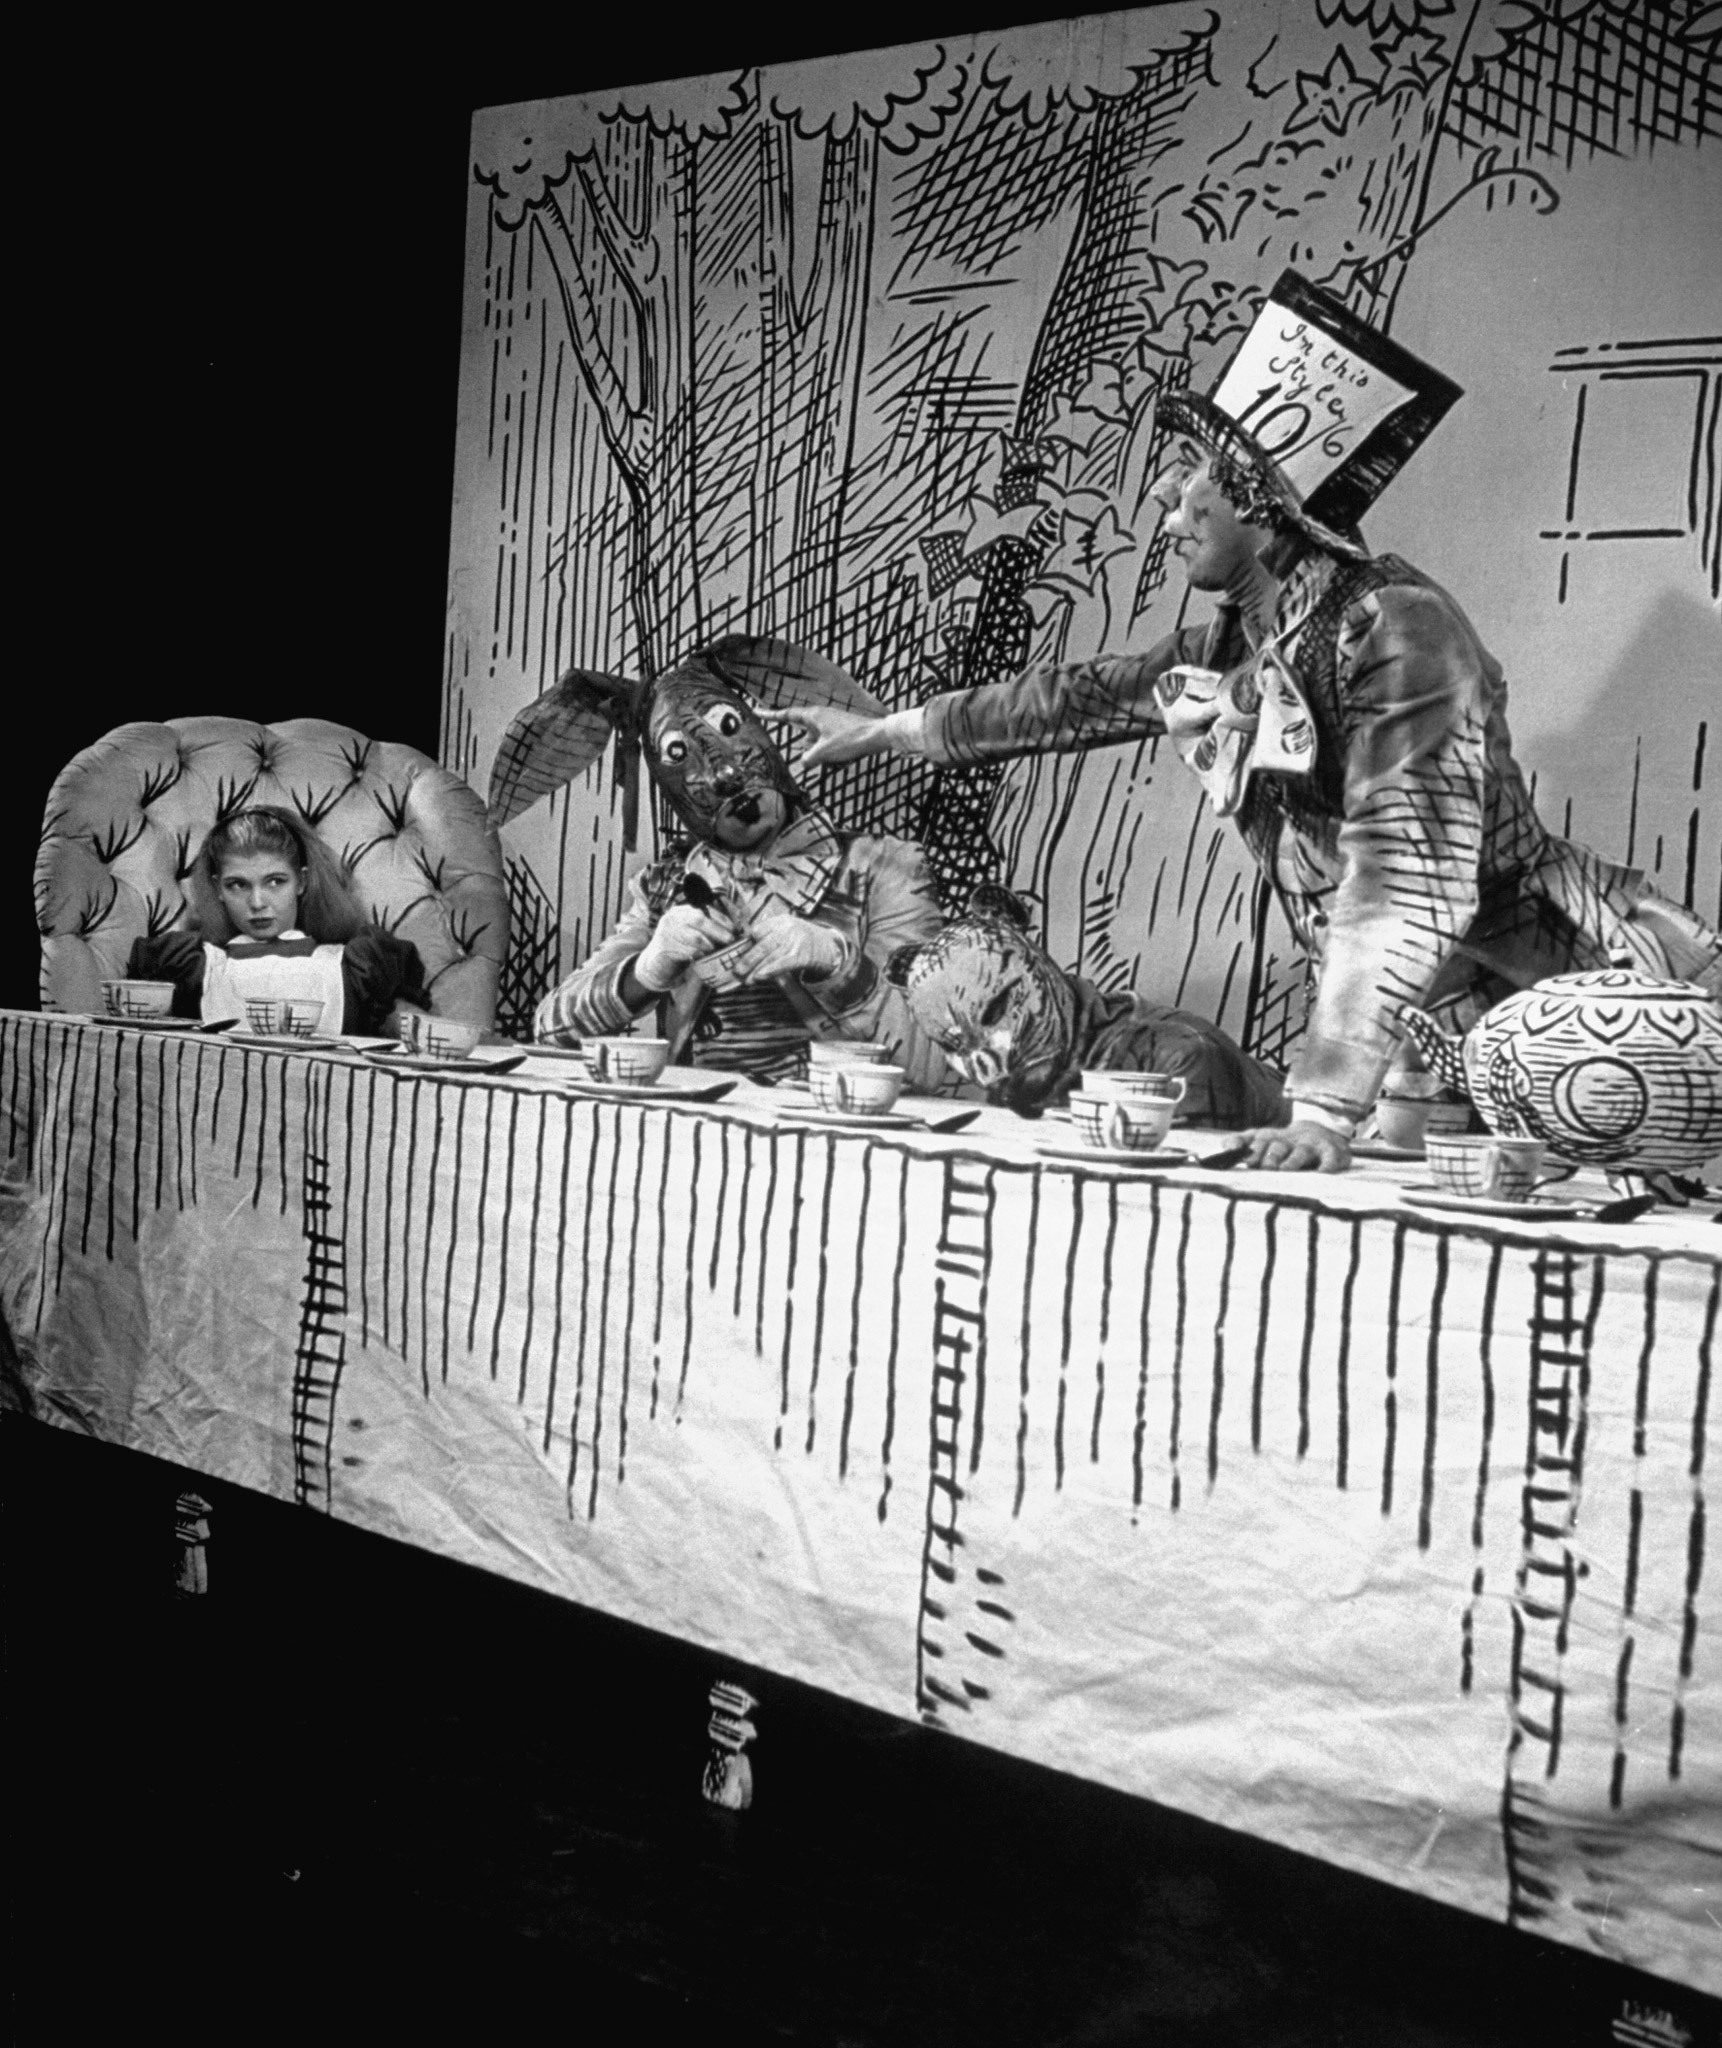 Alice in Wonderland NYC Theater production, 1947